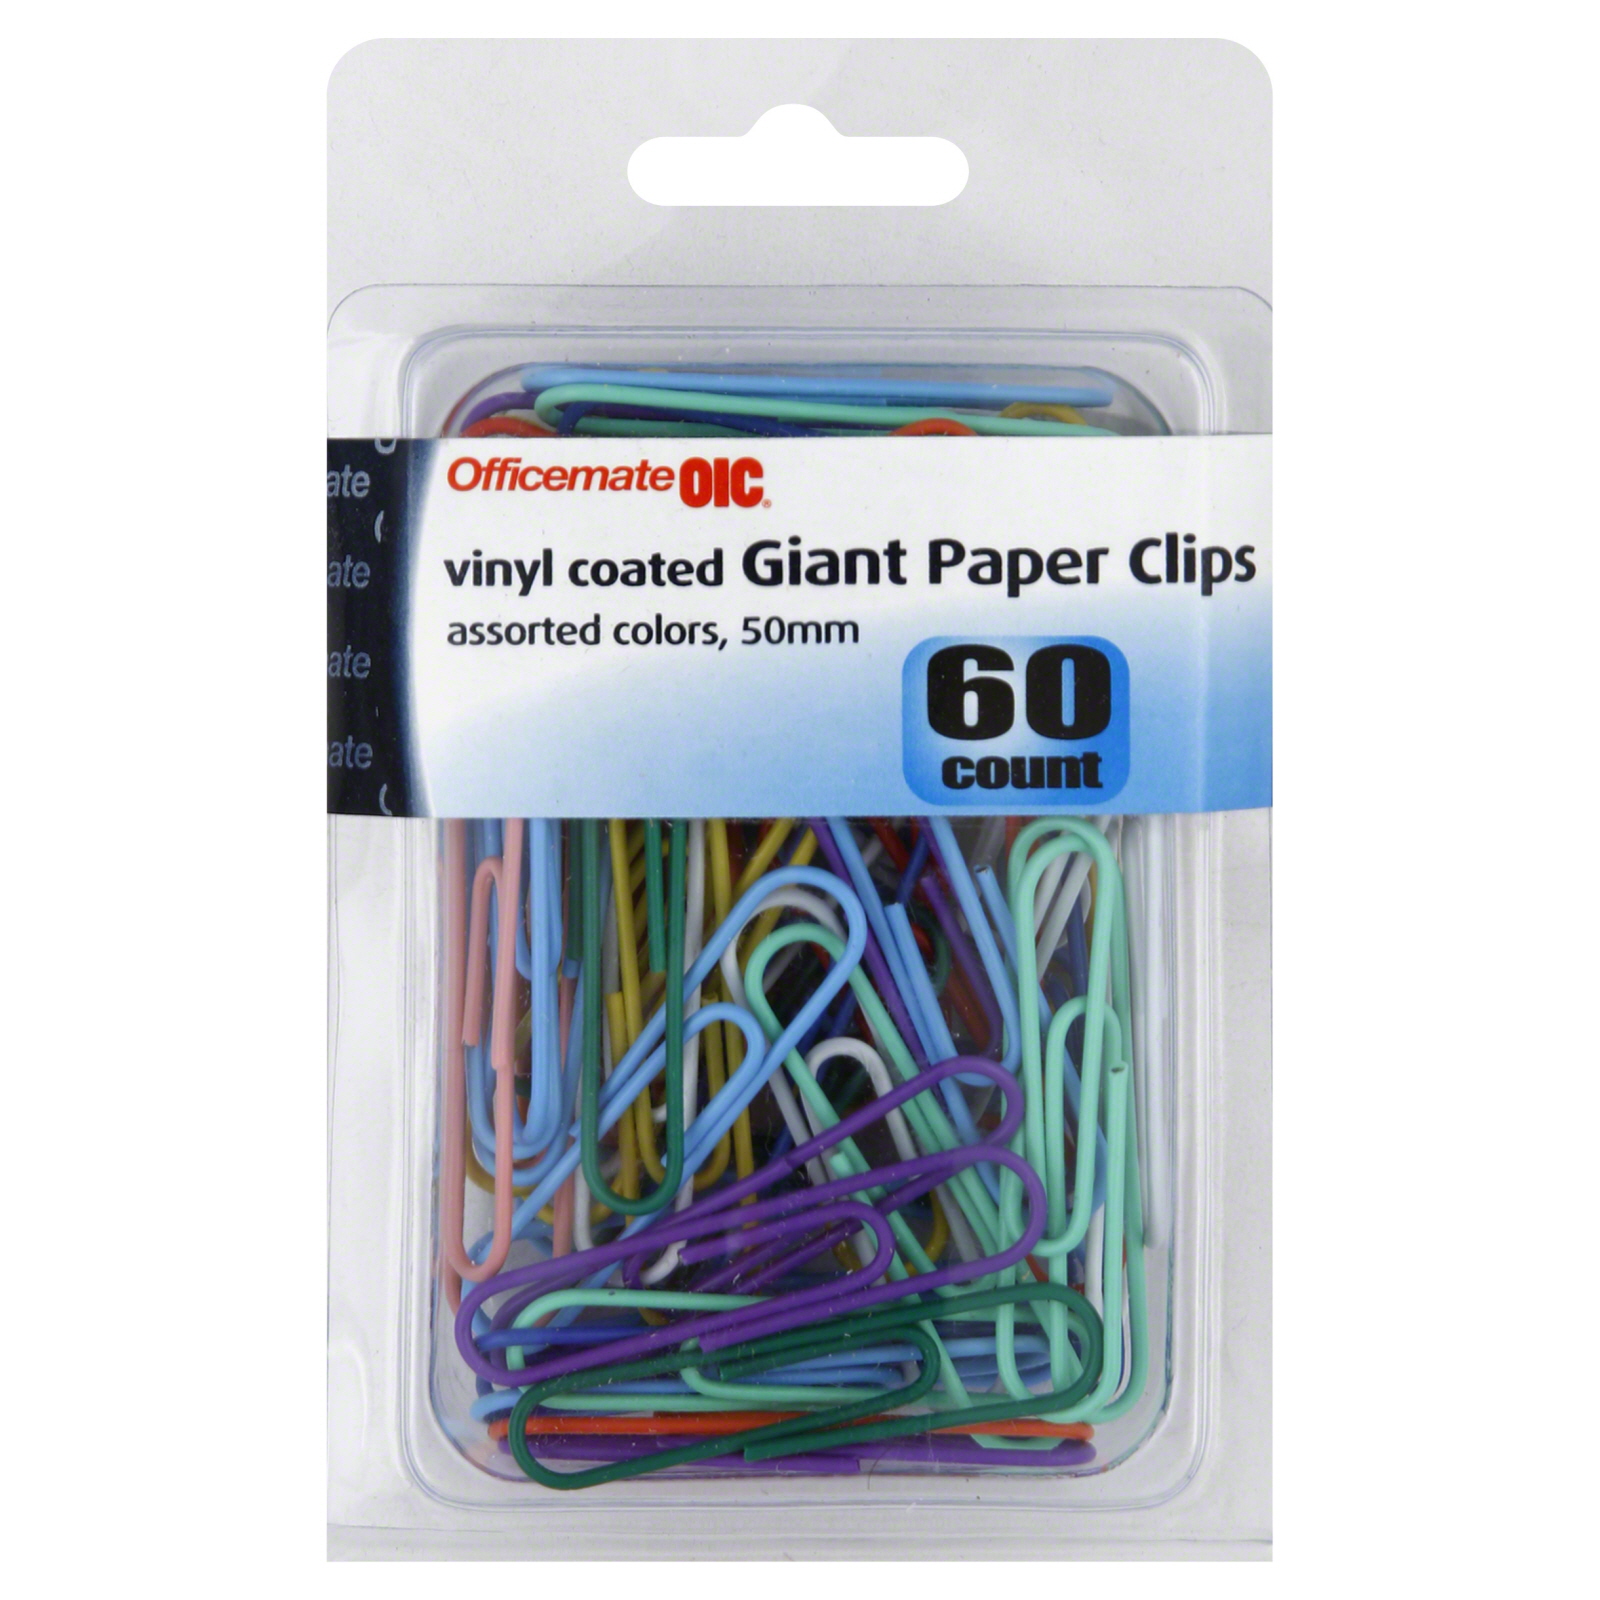 Officemate 97216 Giant Paper Clips Vinyl Coated Assorted Colors - 60 Pack